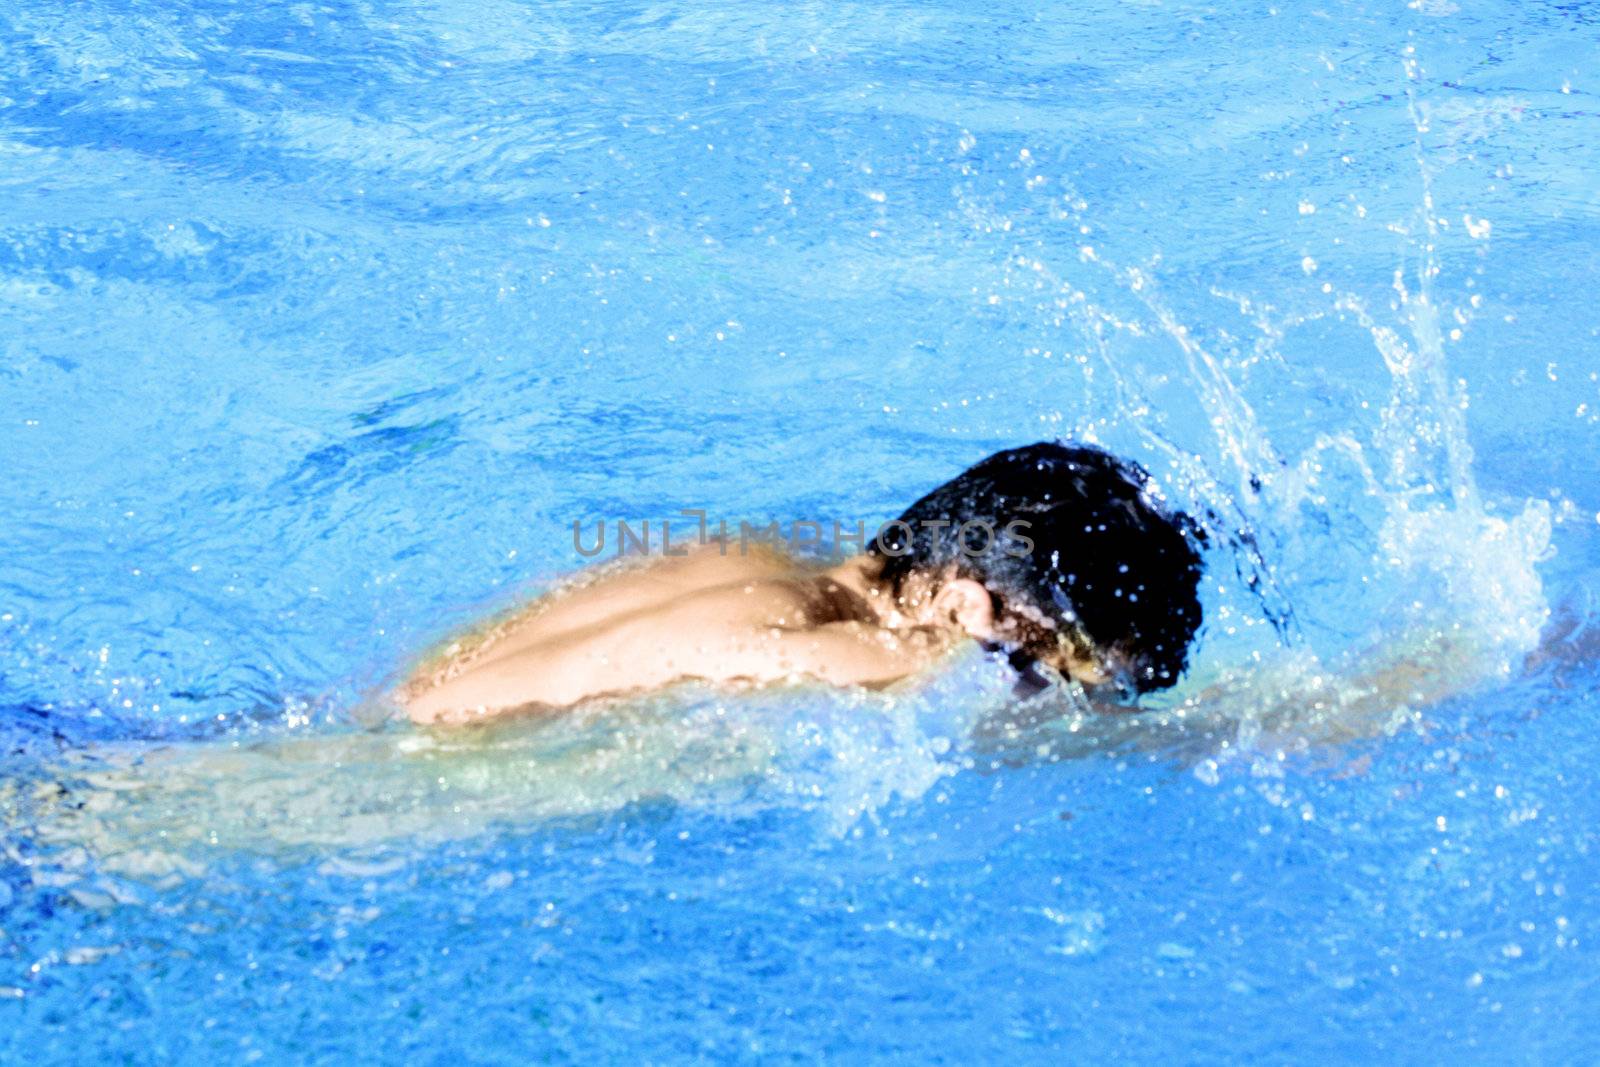 active swimmer by photochecker